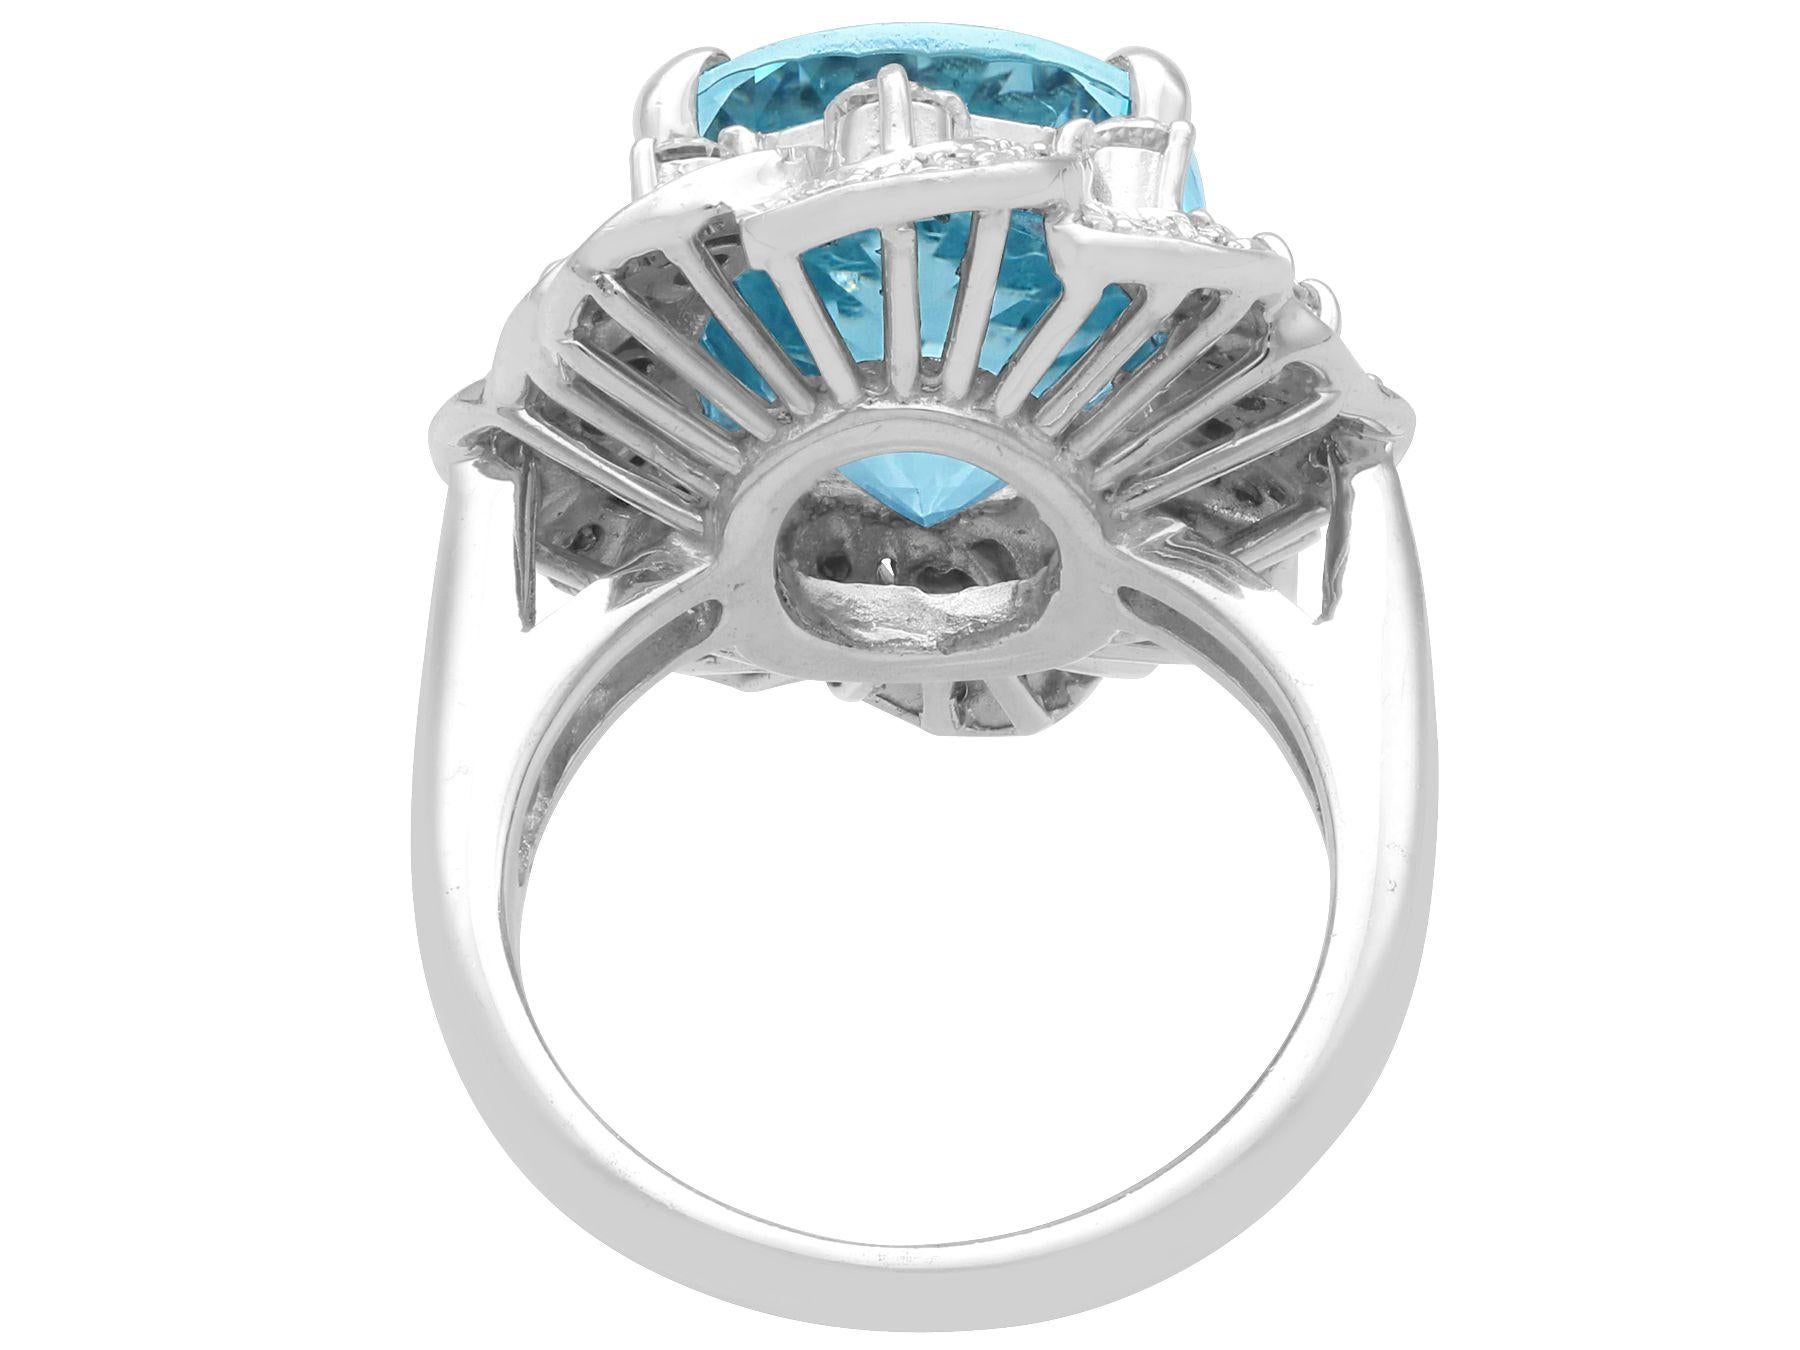 Oval Cut 9.26 Carat Aquamarine and Diamond 18k White Gold Dress Ring For Sale